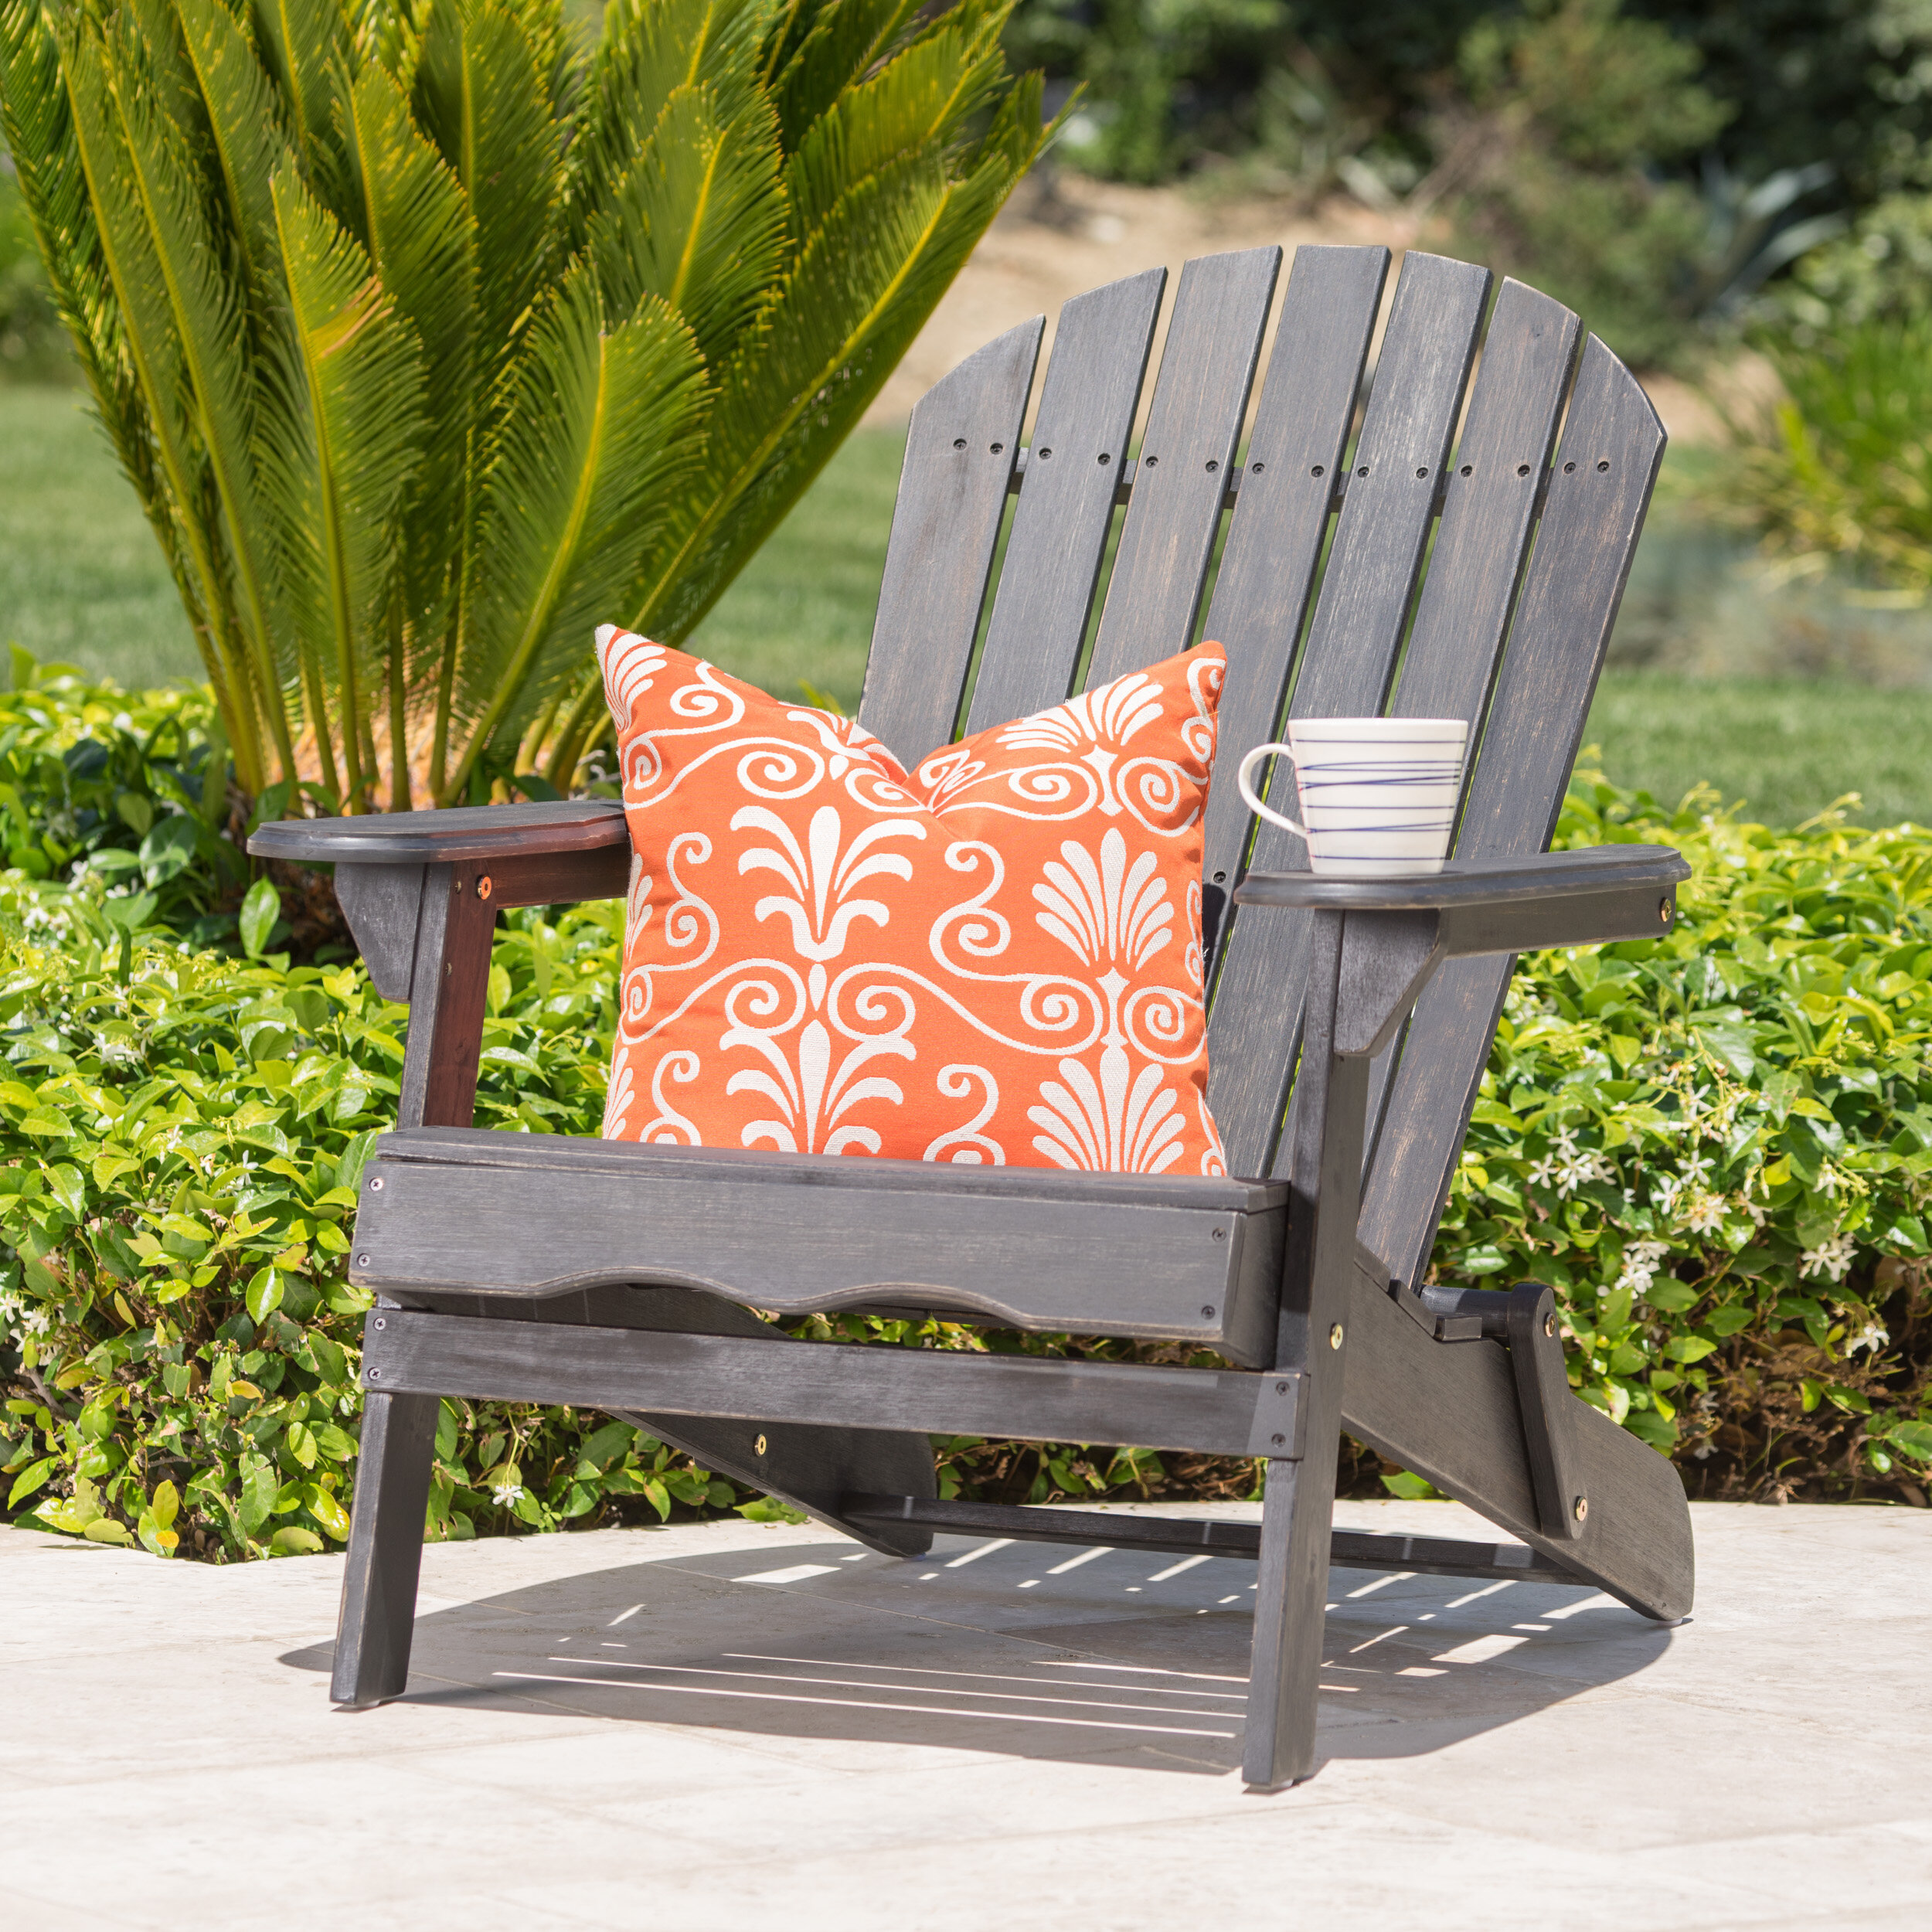 [BIG SALE] Adirondack Chairs for Less You’ll Love In 2021 | Wayfair